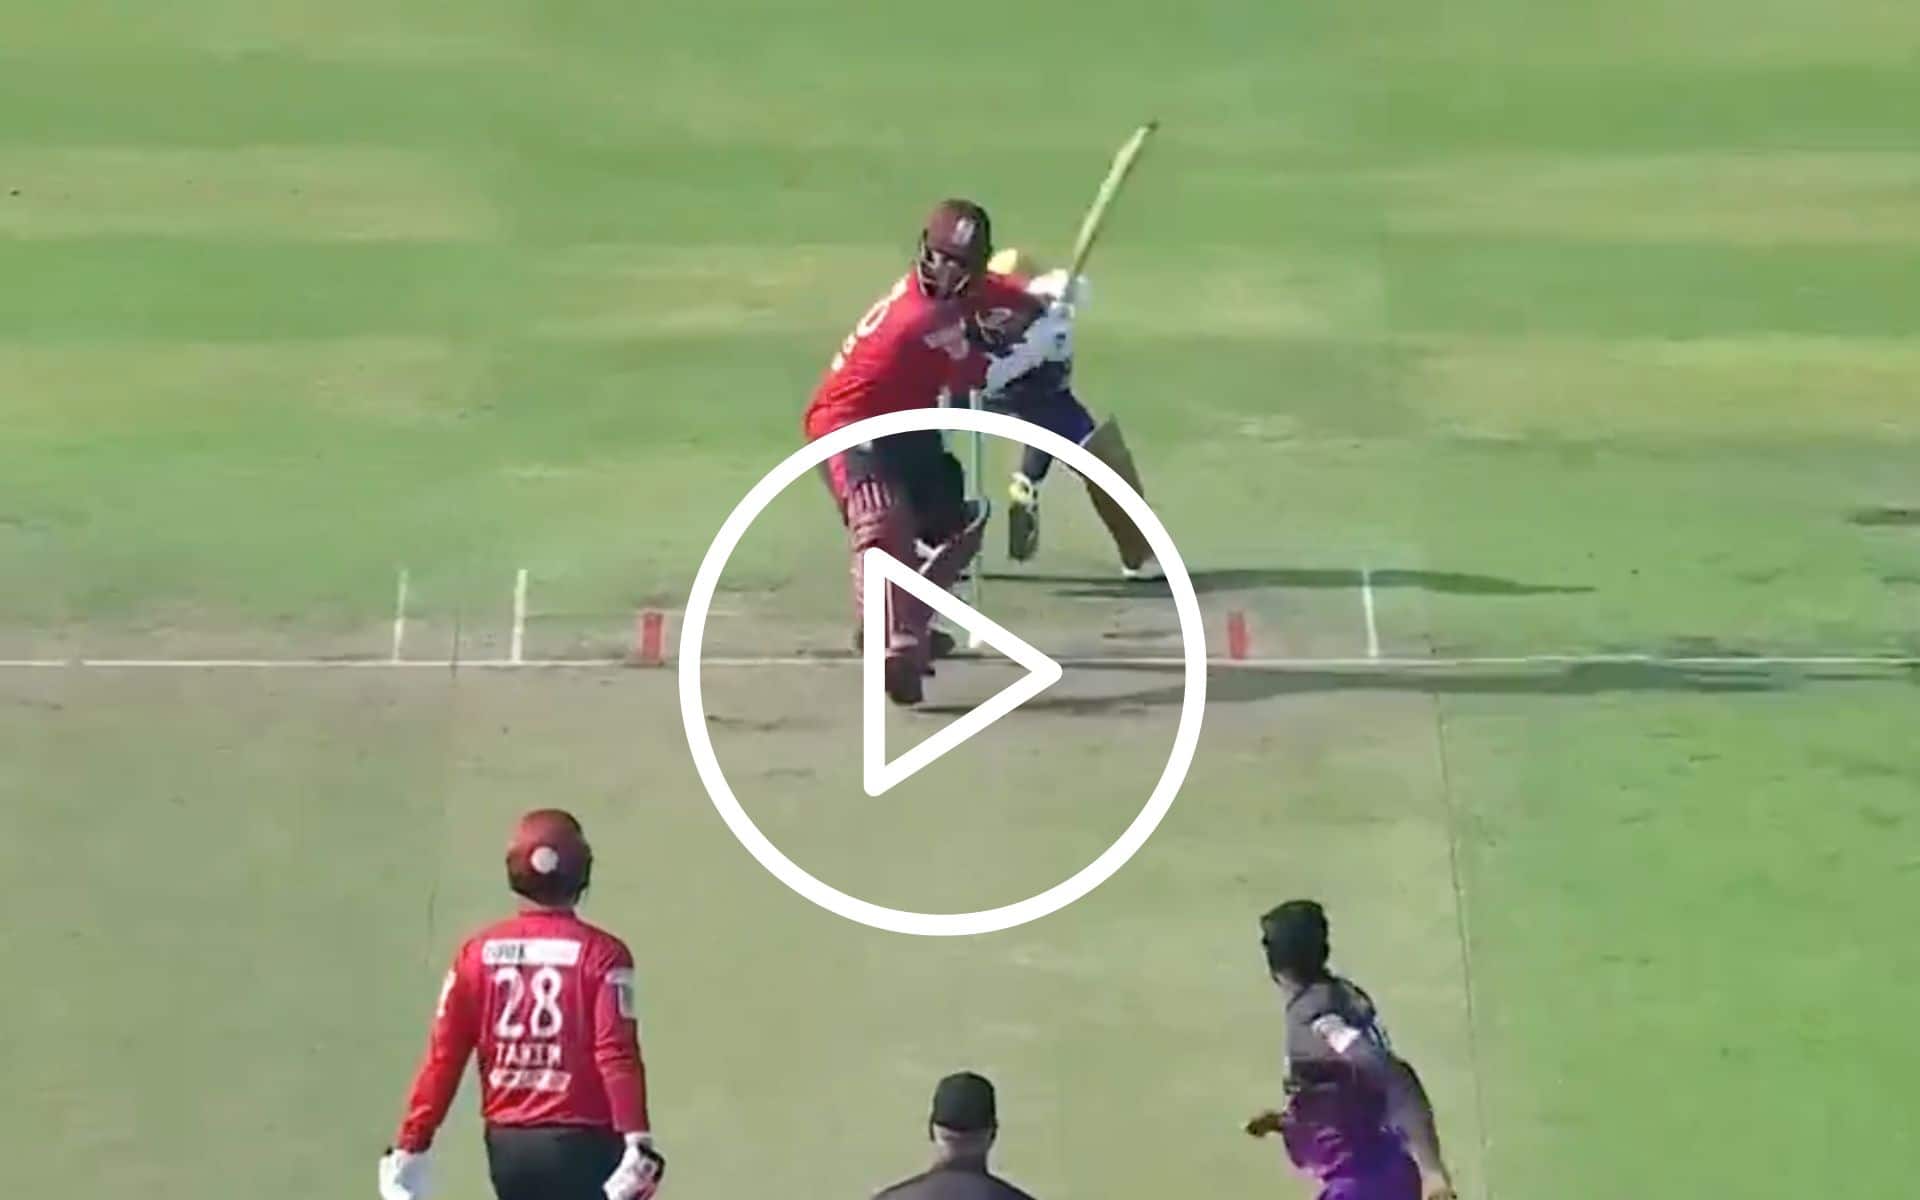 [Watch] LSG's Kyle Mayers Gears Up For IPL 2024 With Brutal Hittings In Bangladesh